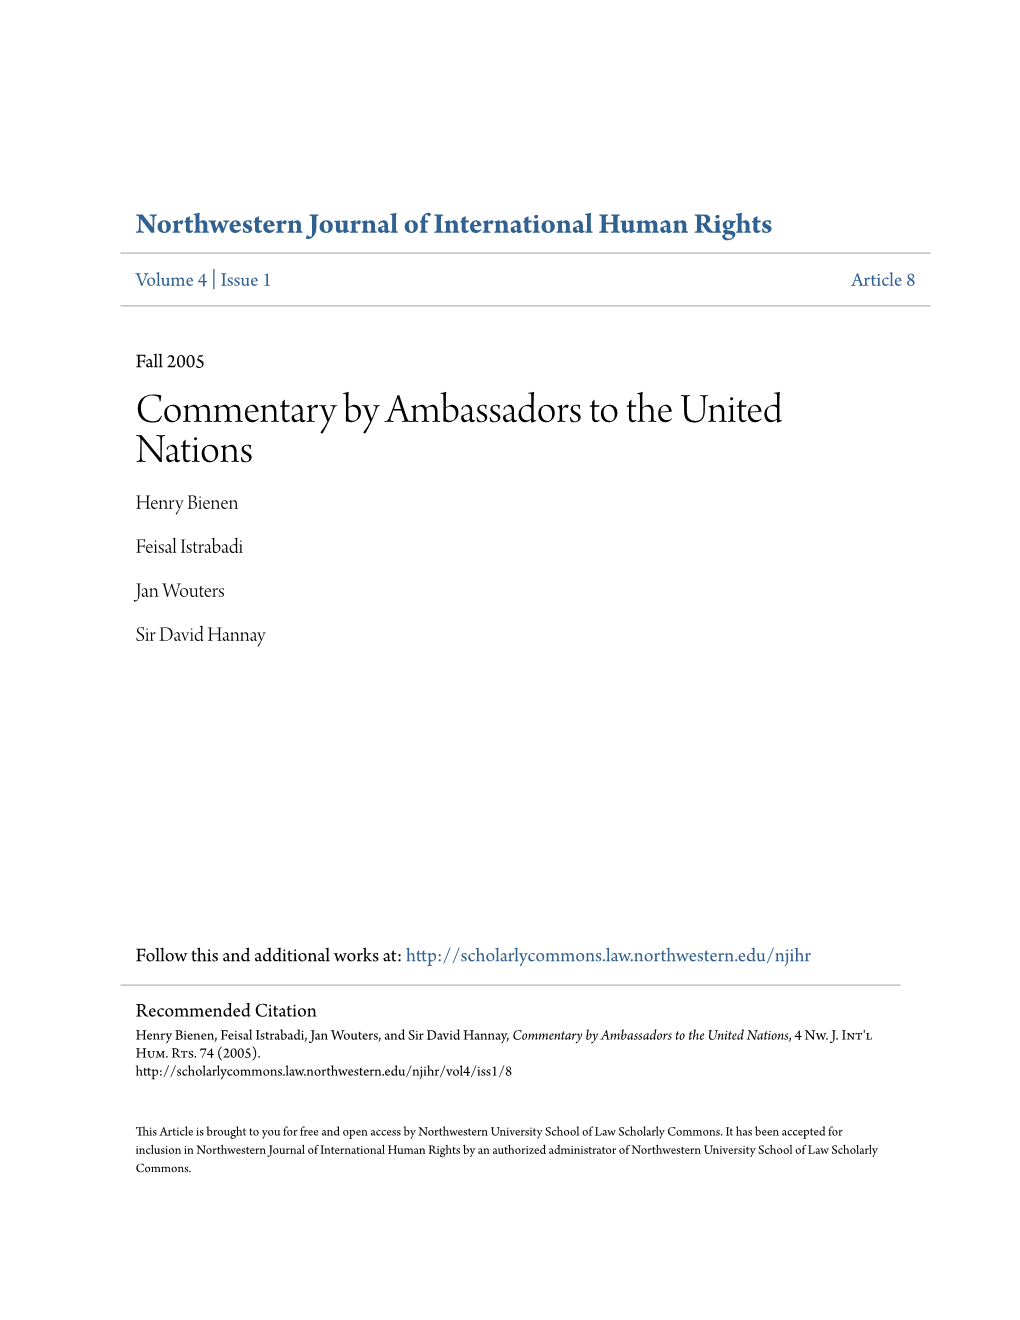 Commentary by Ambassadors to the United Nations Henry Bienen